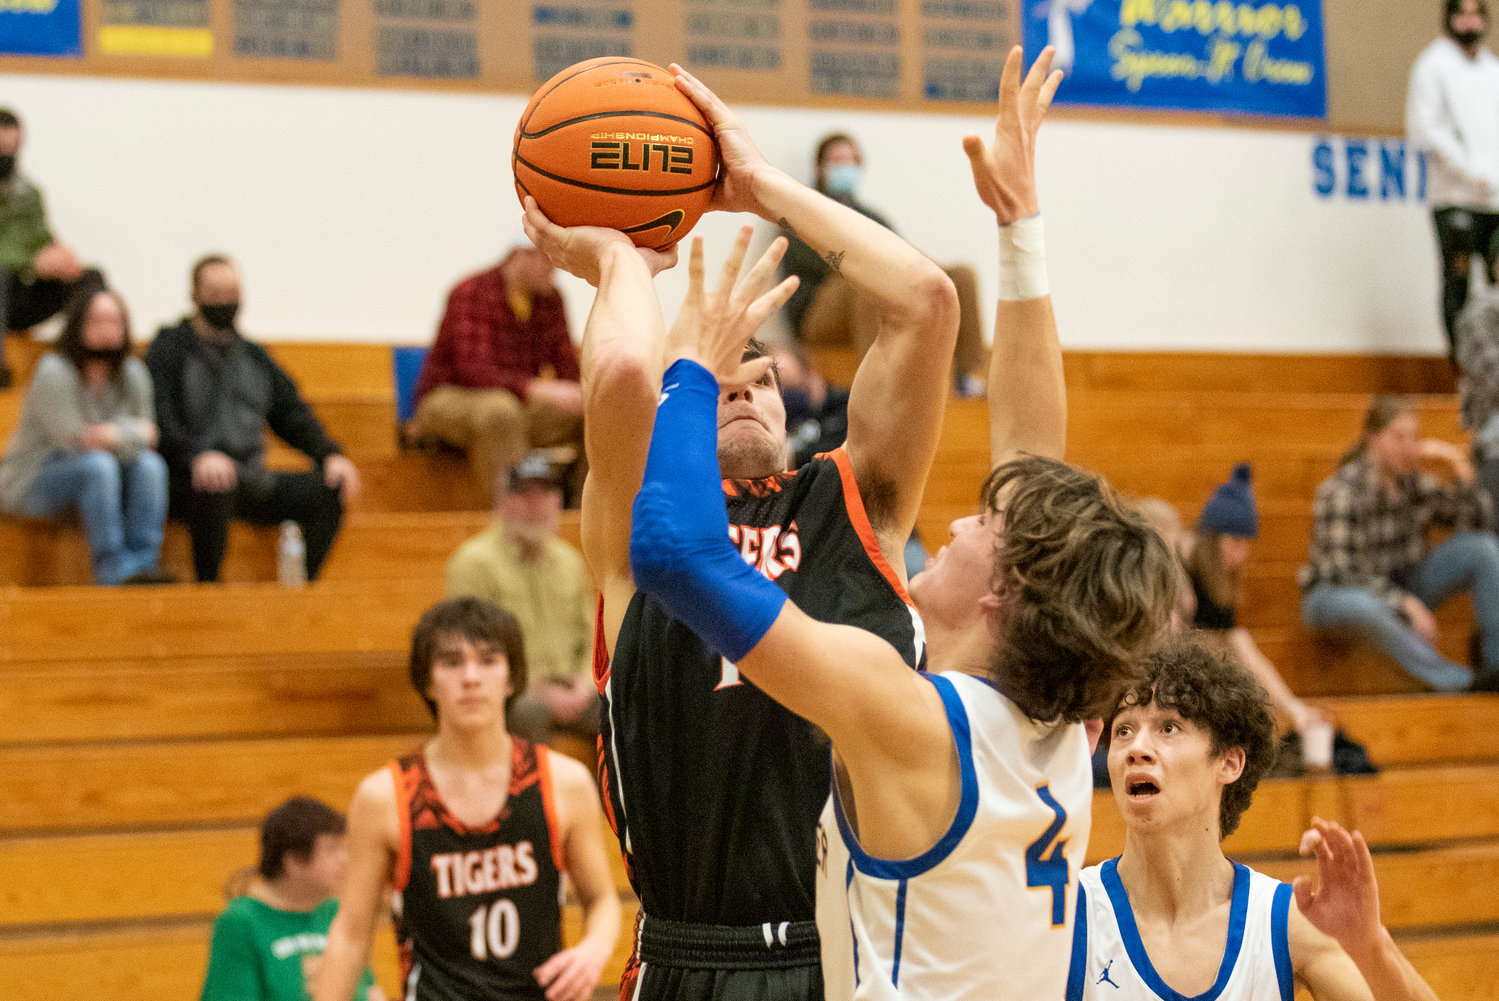 Centralia's Rex Akins (14) shoots a contested jumper against Rochester on Jan. 19.